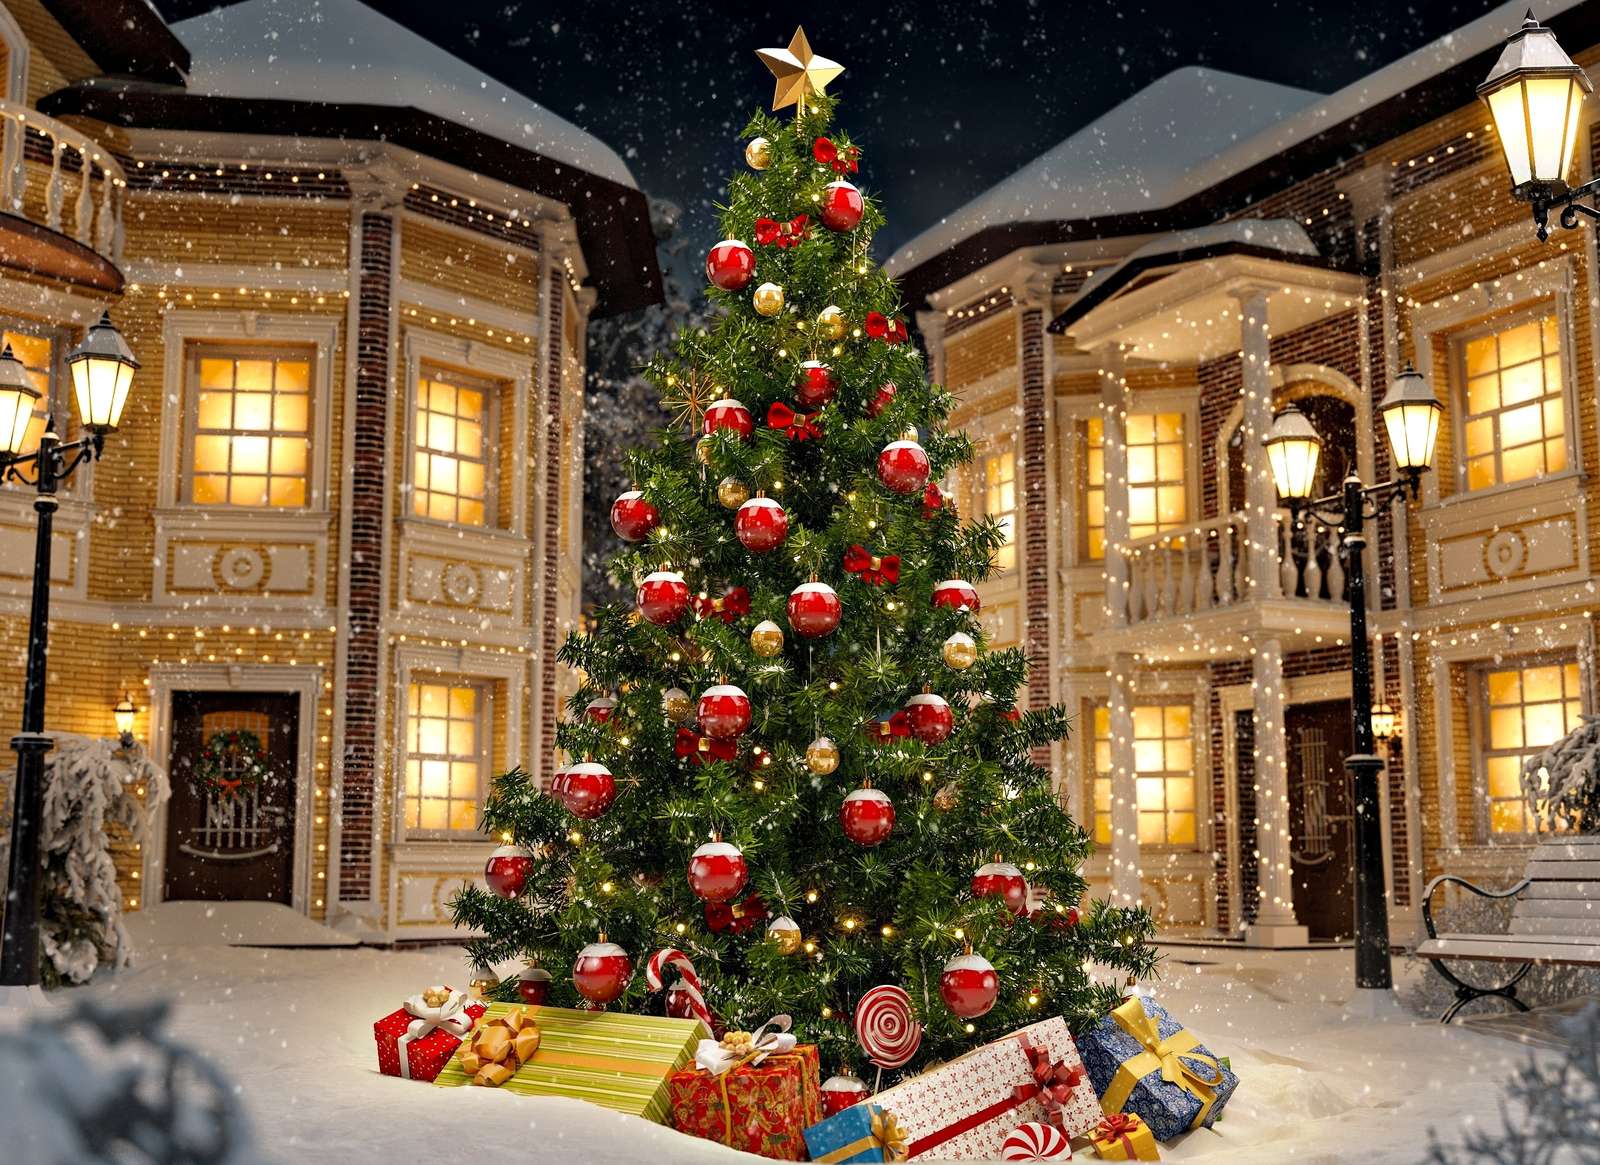 A beautiful Christmas tree online puzzle